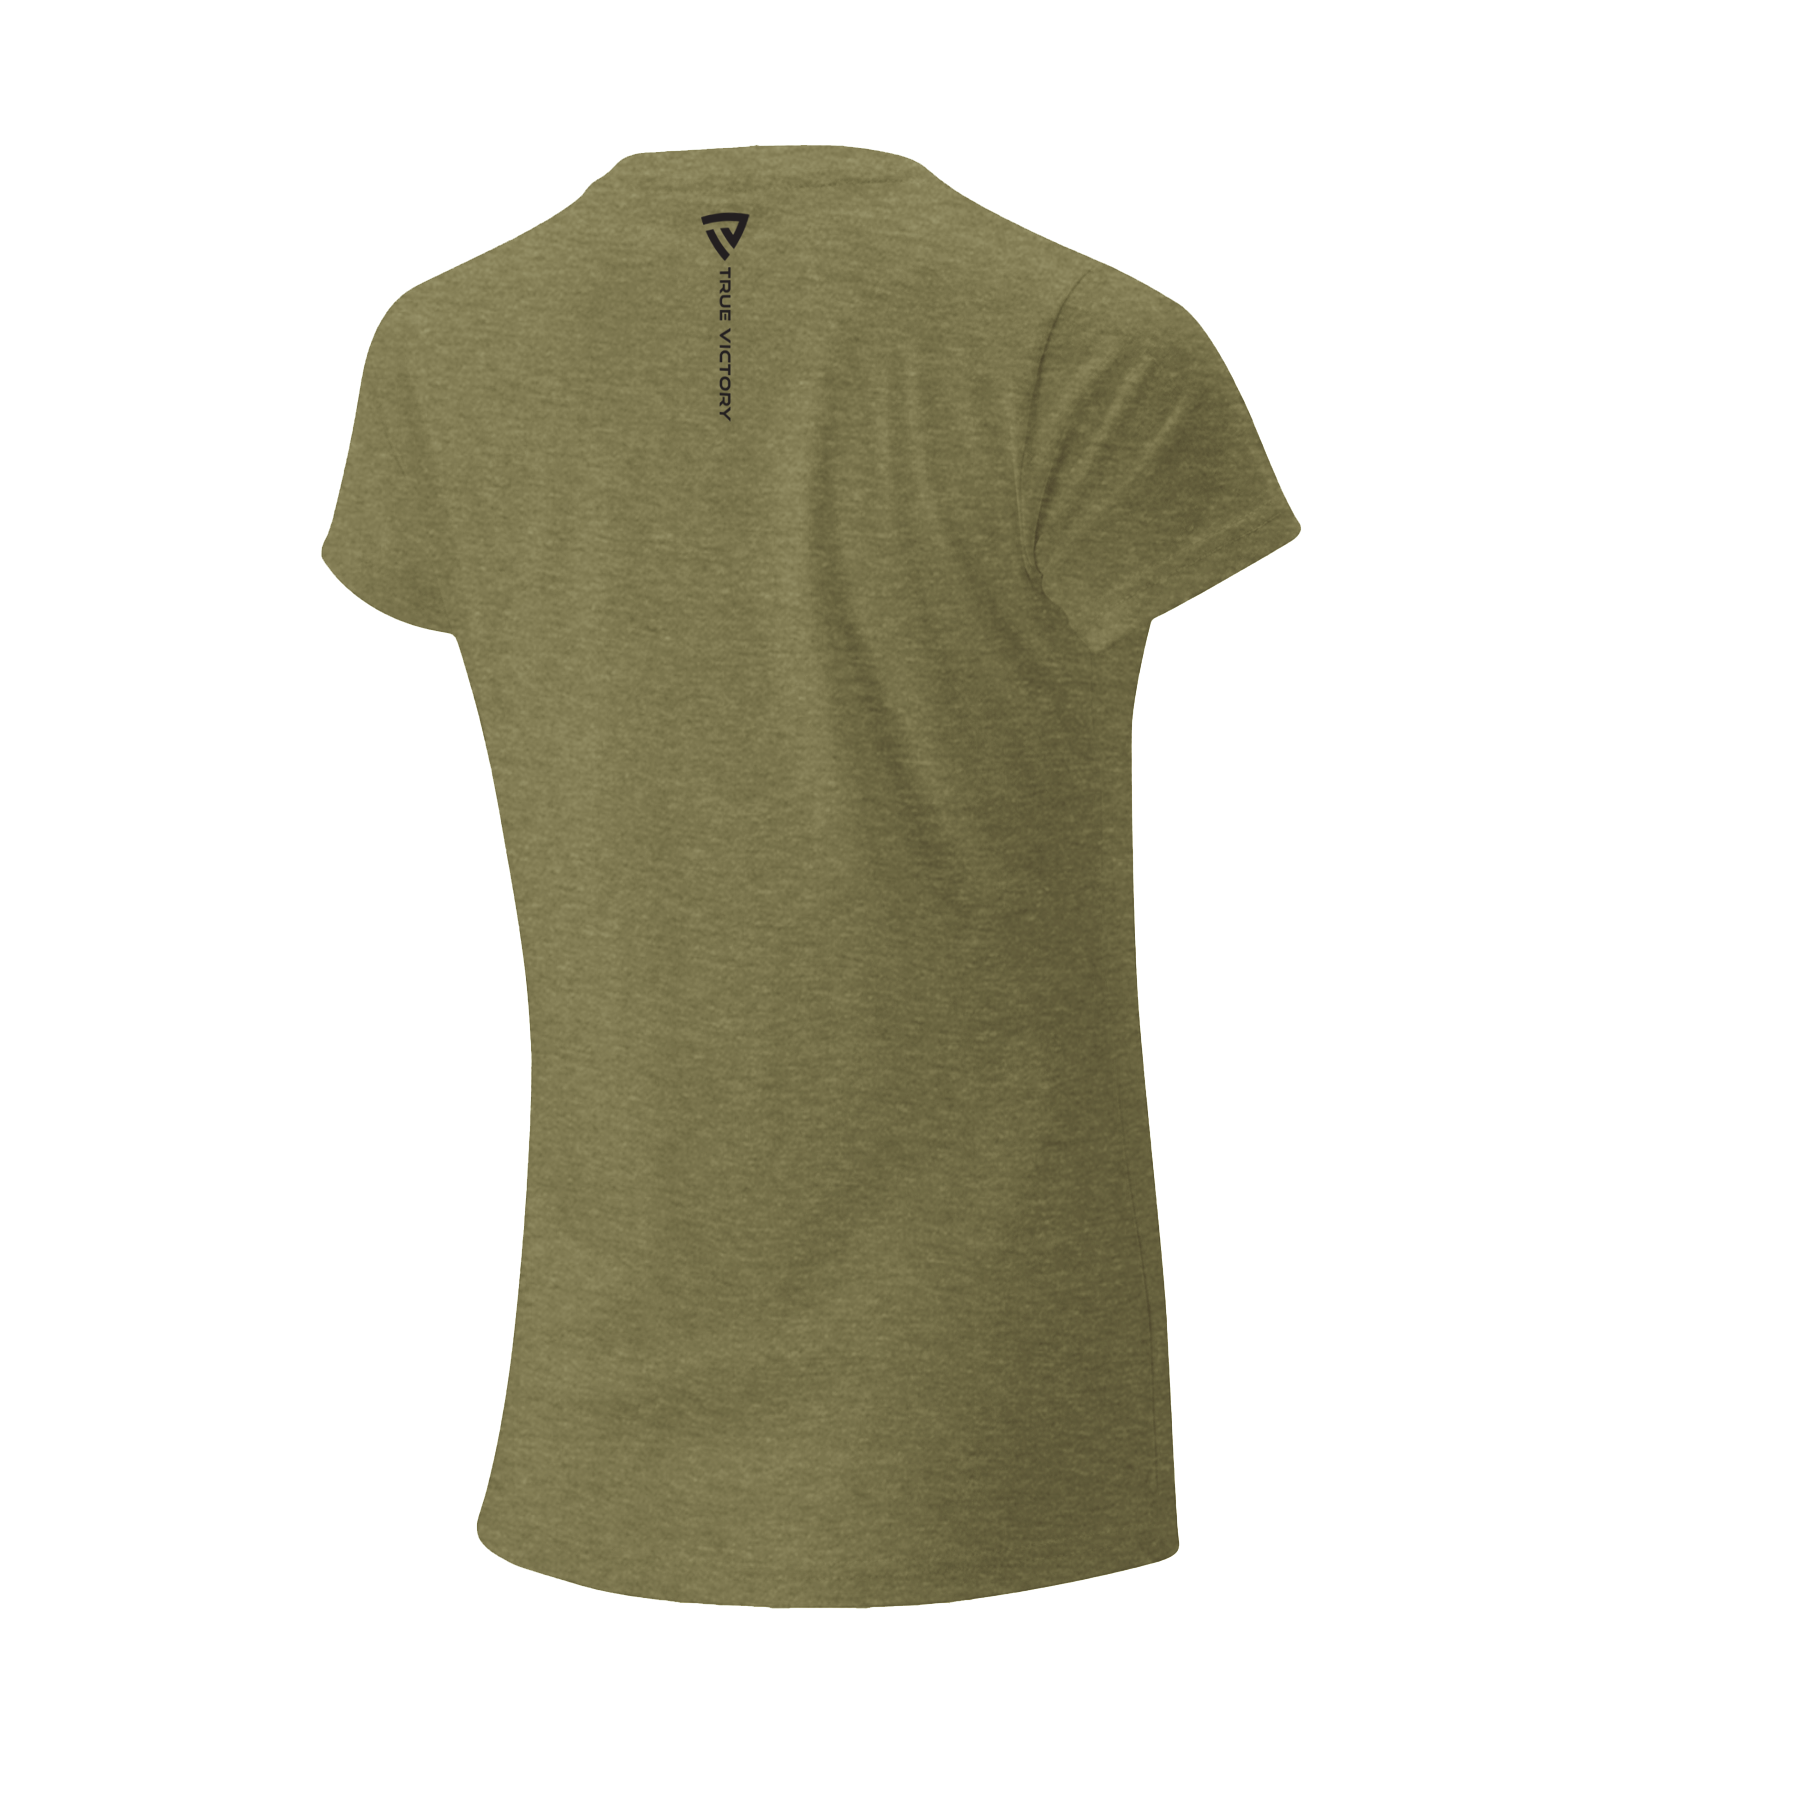 Women's Victorious Military Green Tee